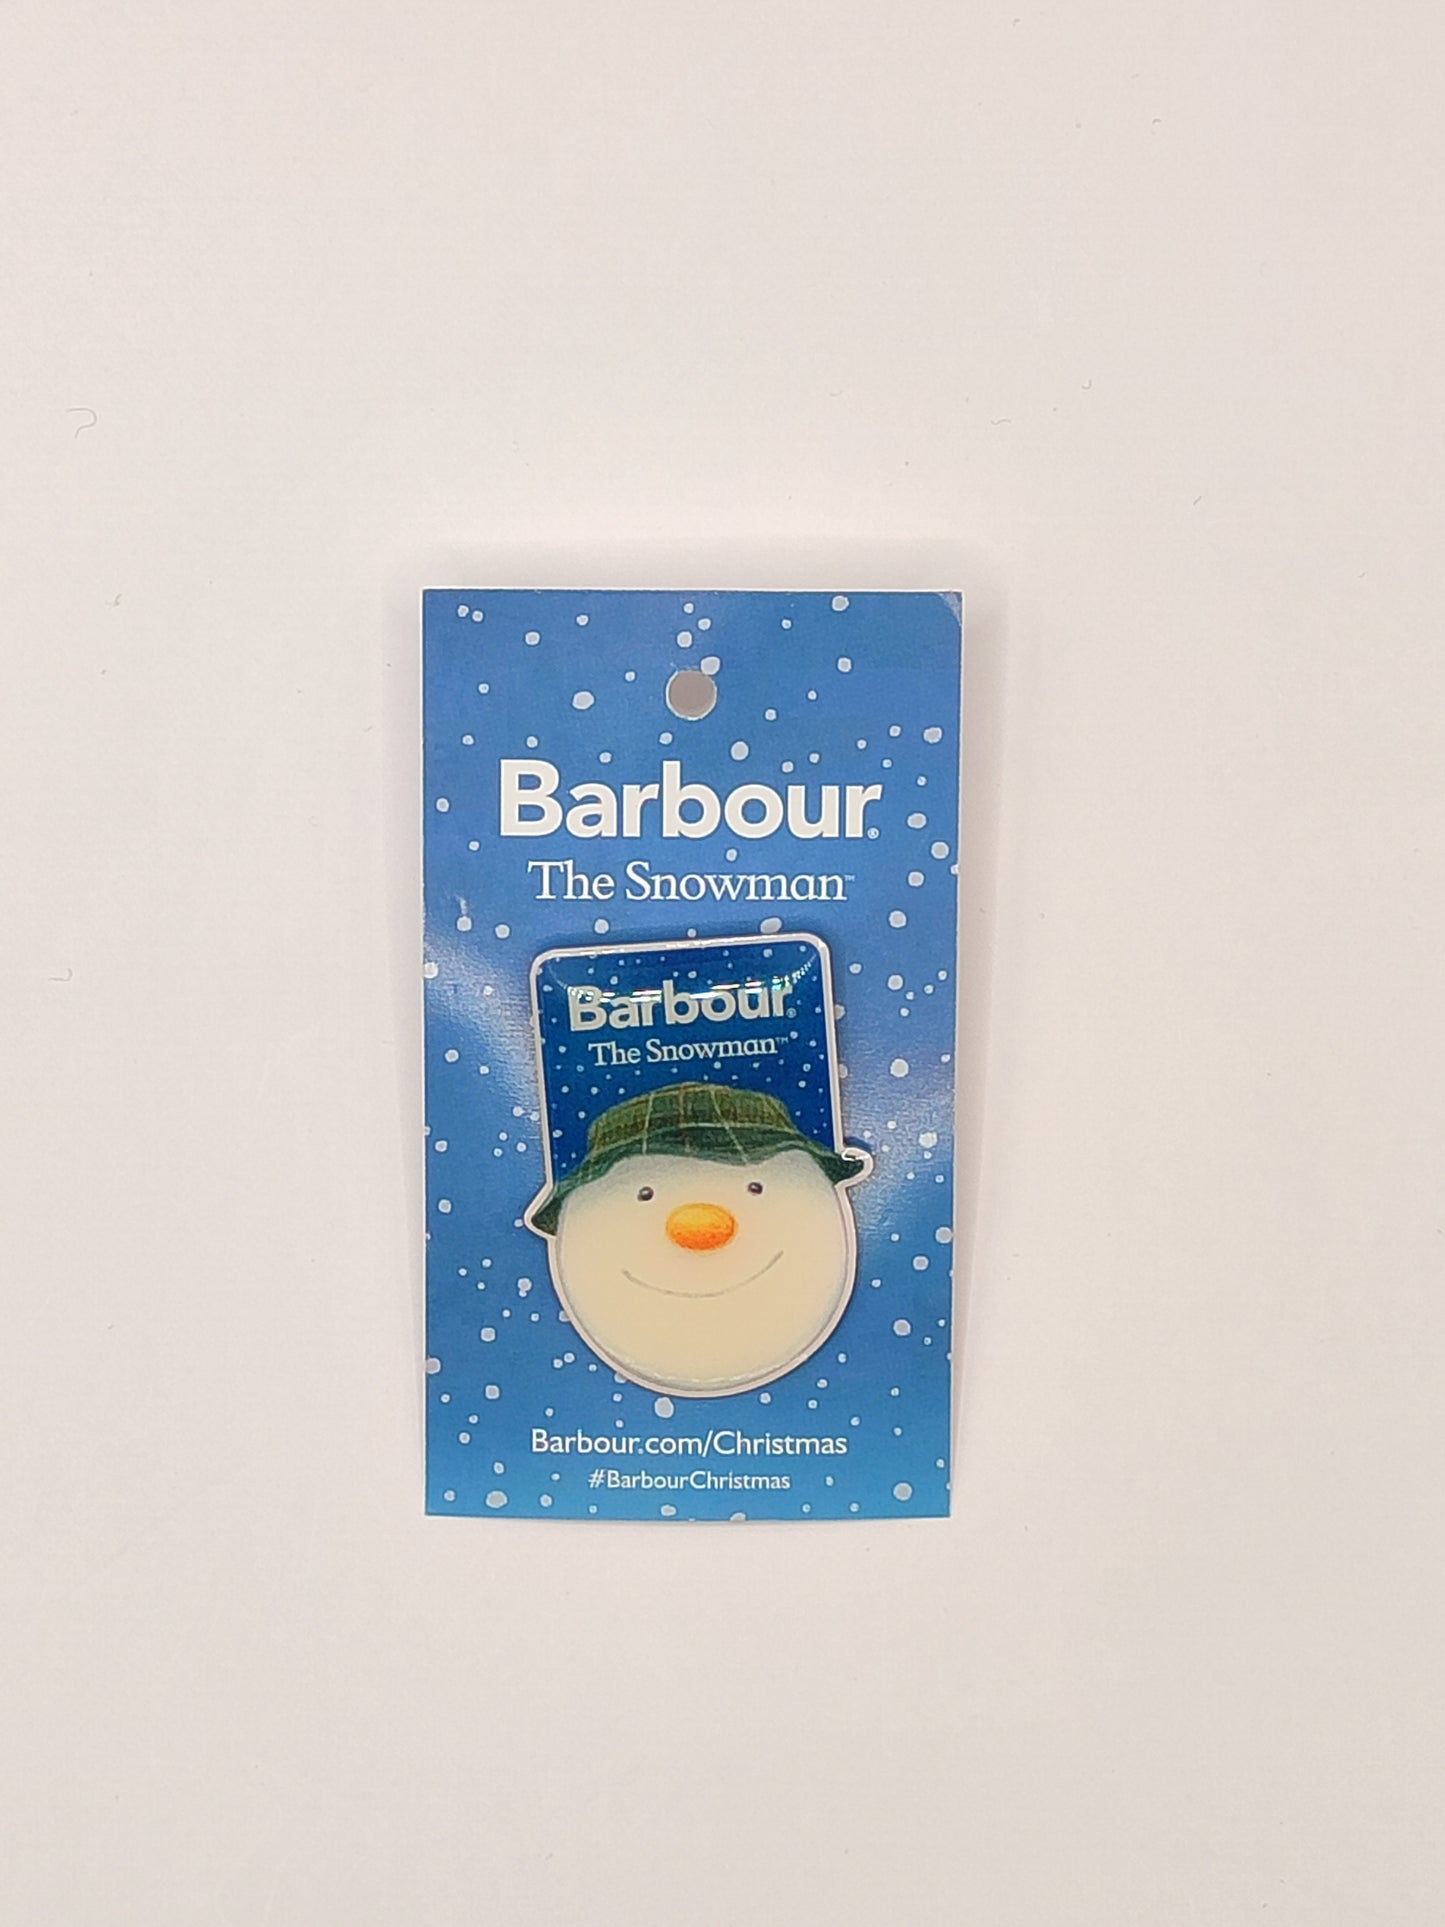 Spilla Barbour Pupazzo di Neve - Snowman Barbour Pin